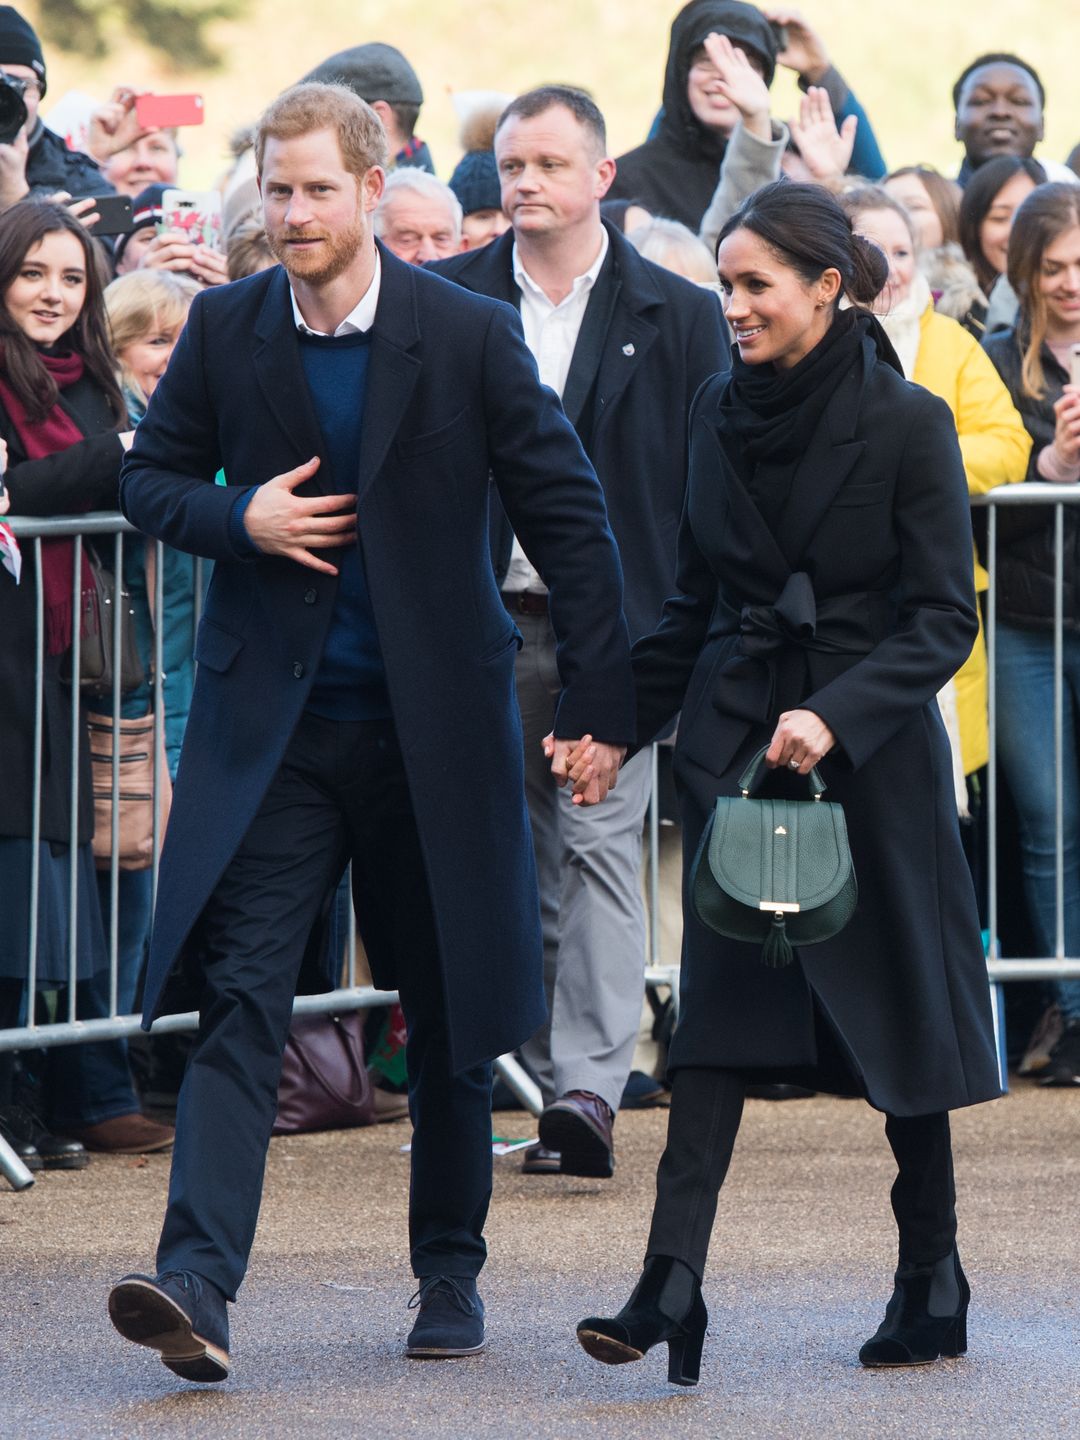 Prince Harry and his then-fiancé Meghan Markle visiting Cardiff Castle in 2018 